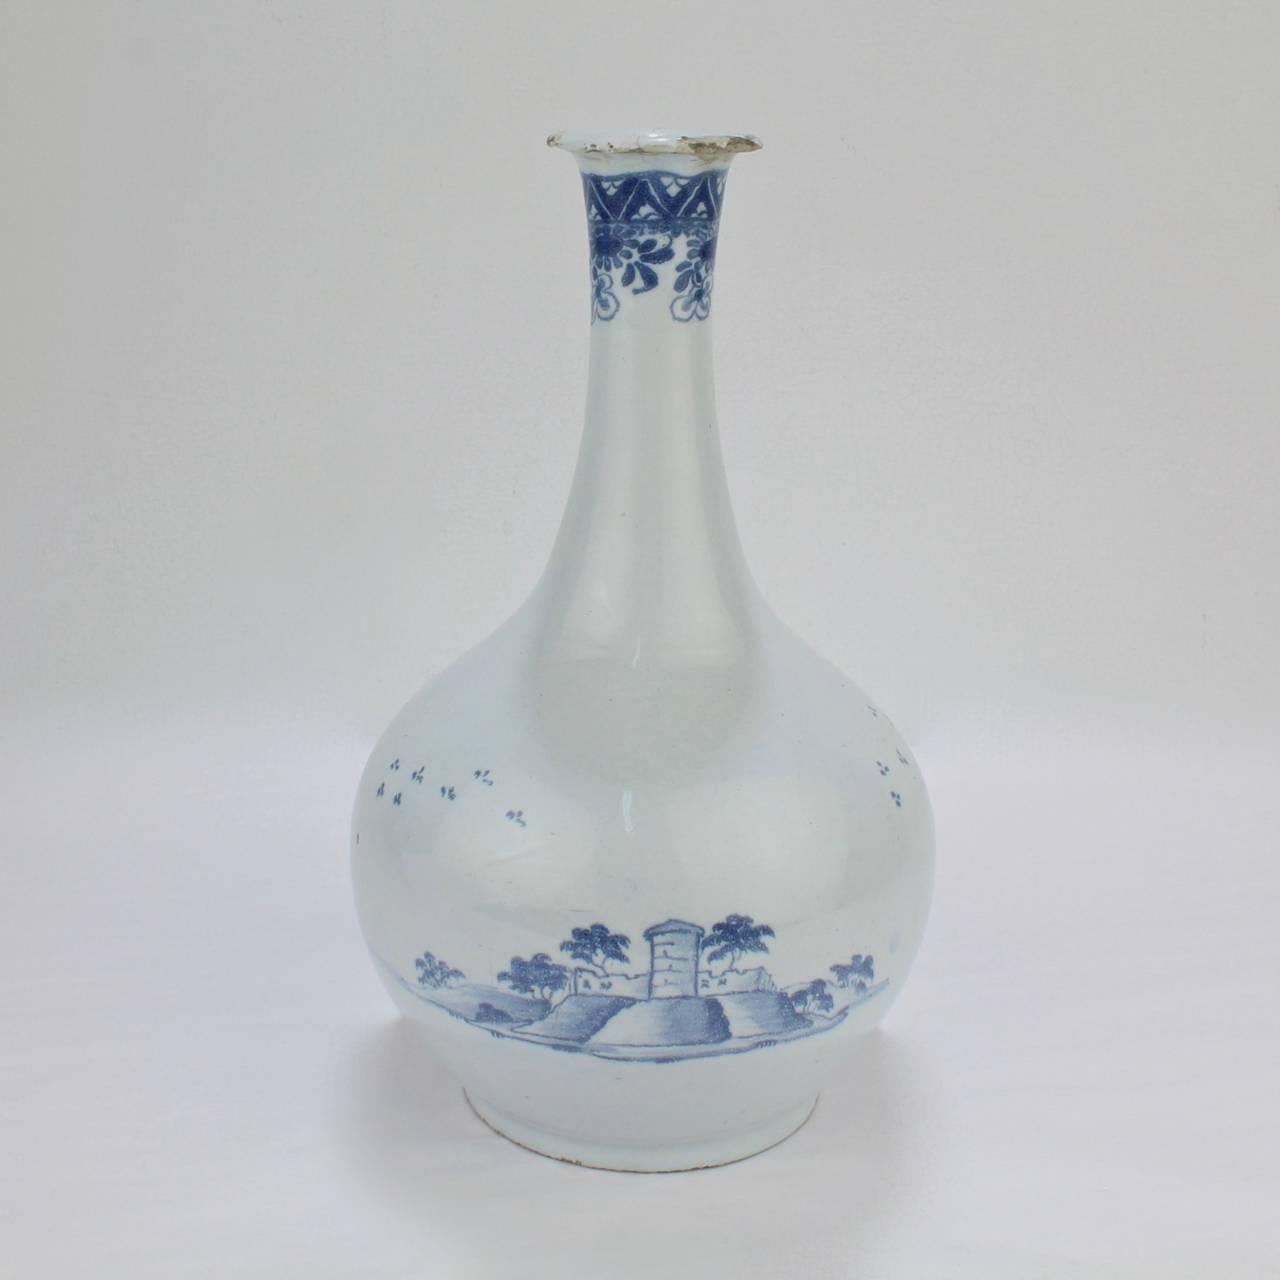 George III 18th Century English Delft Pottery Bottle Vase from the F H Garner Collection